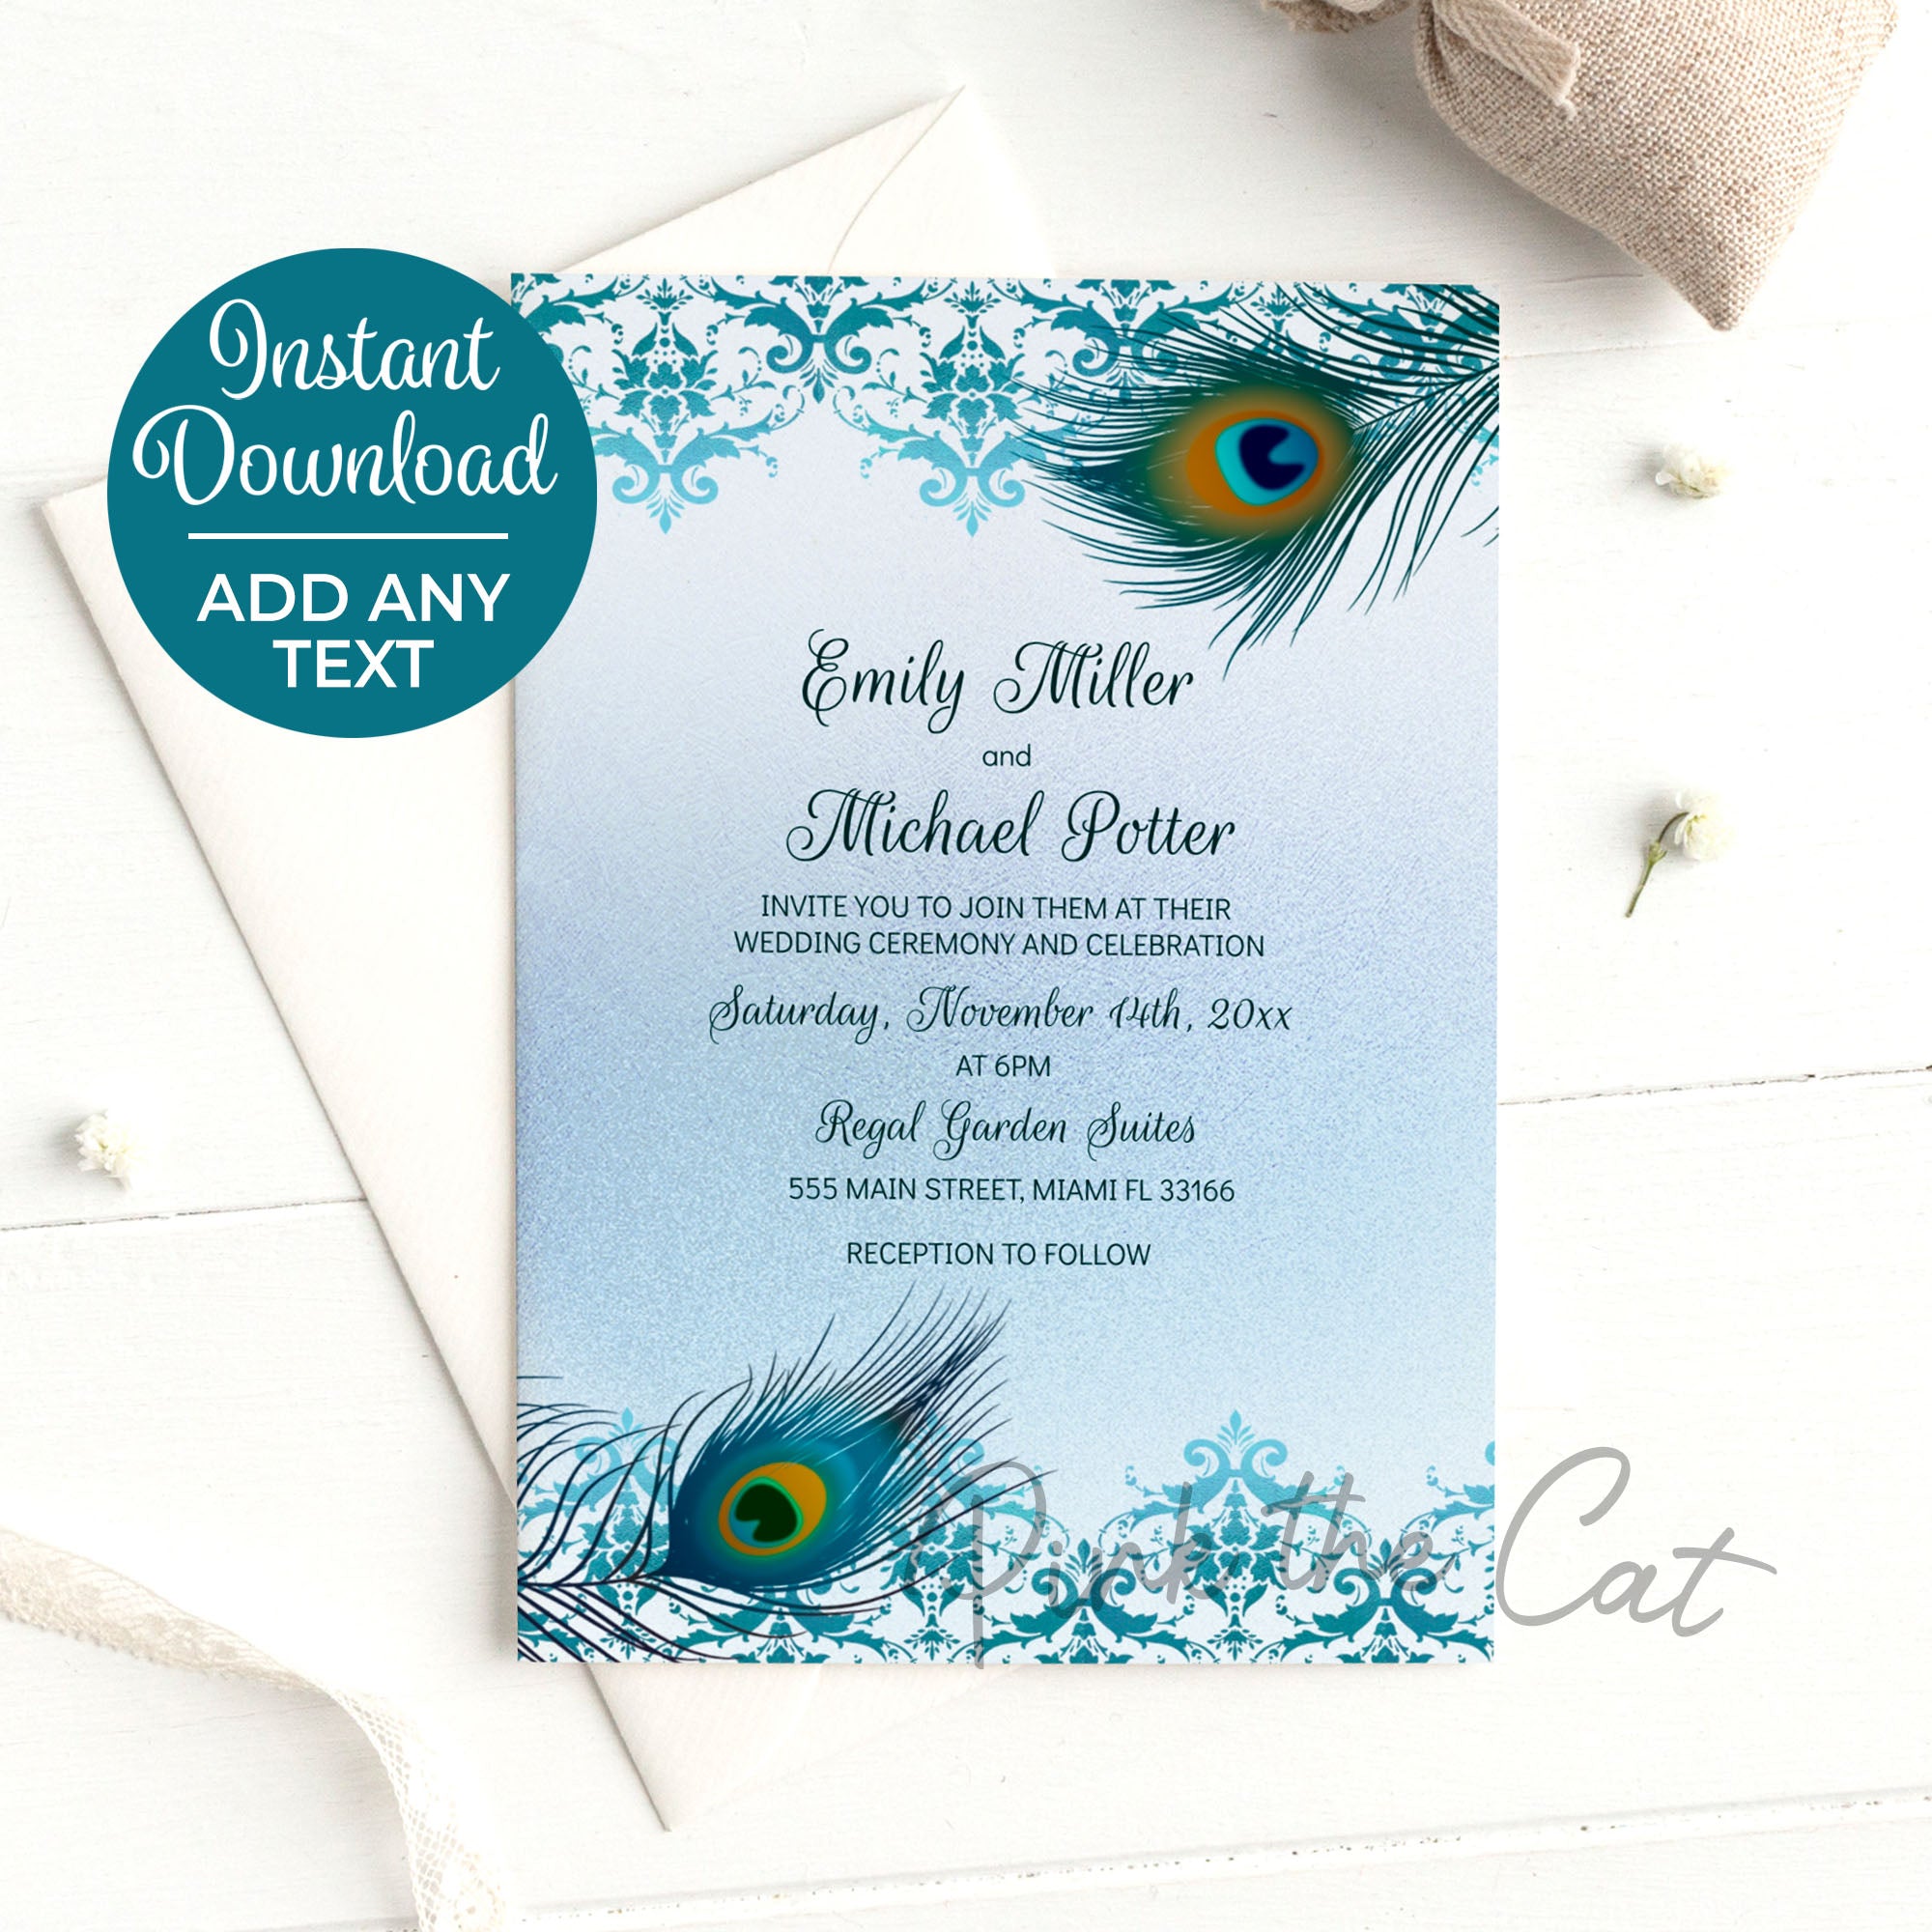 Wedding Invitations Cards Peacock Feathers